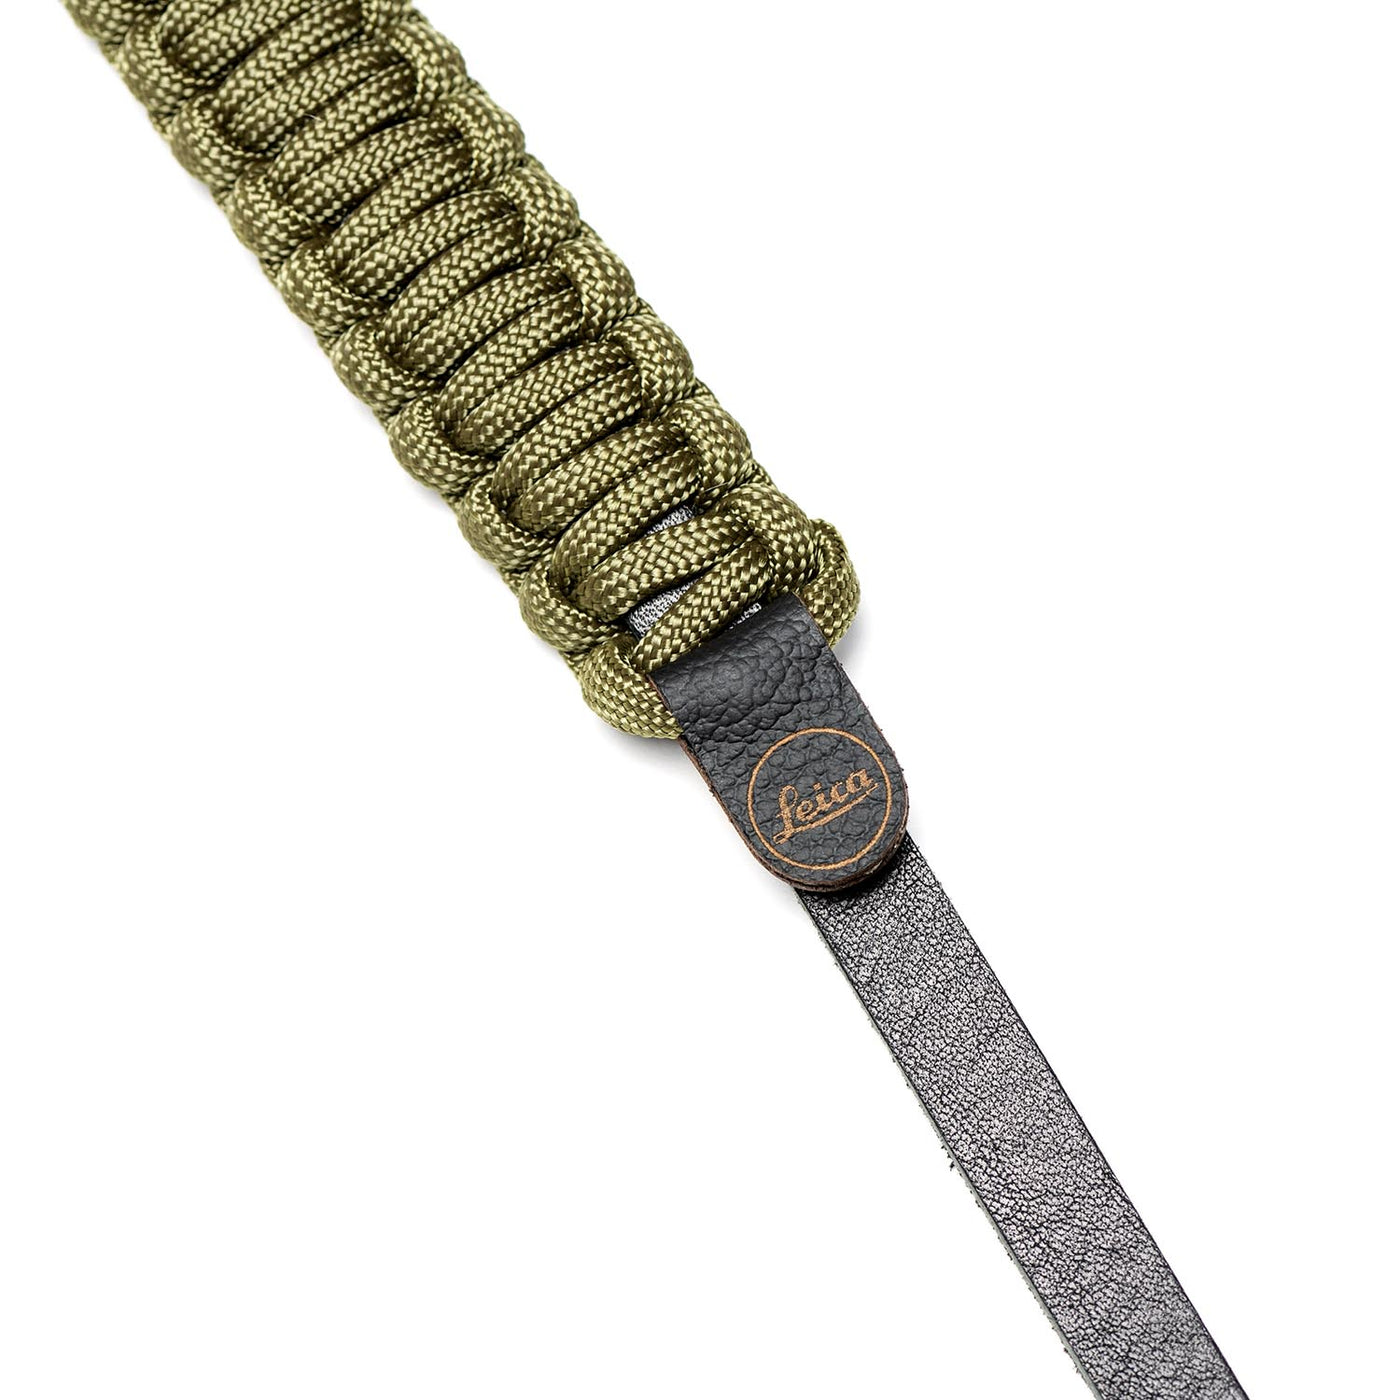 Leather end of Leica Paracord Strap 